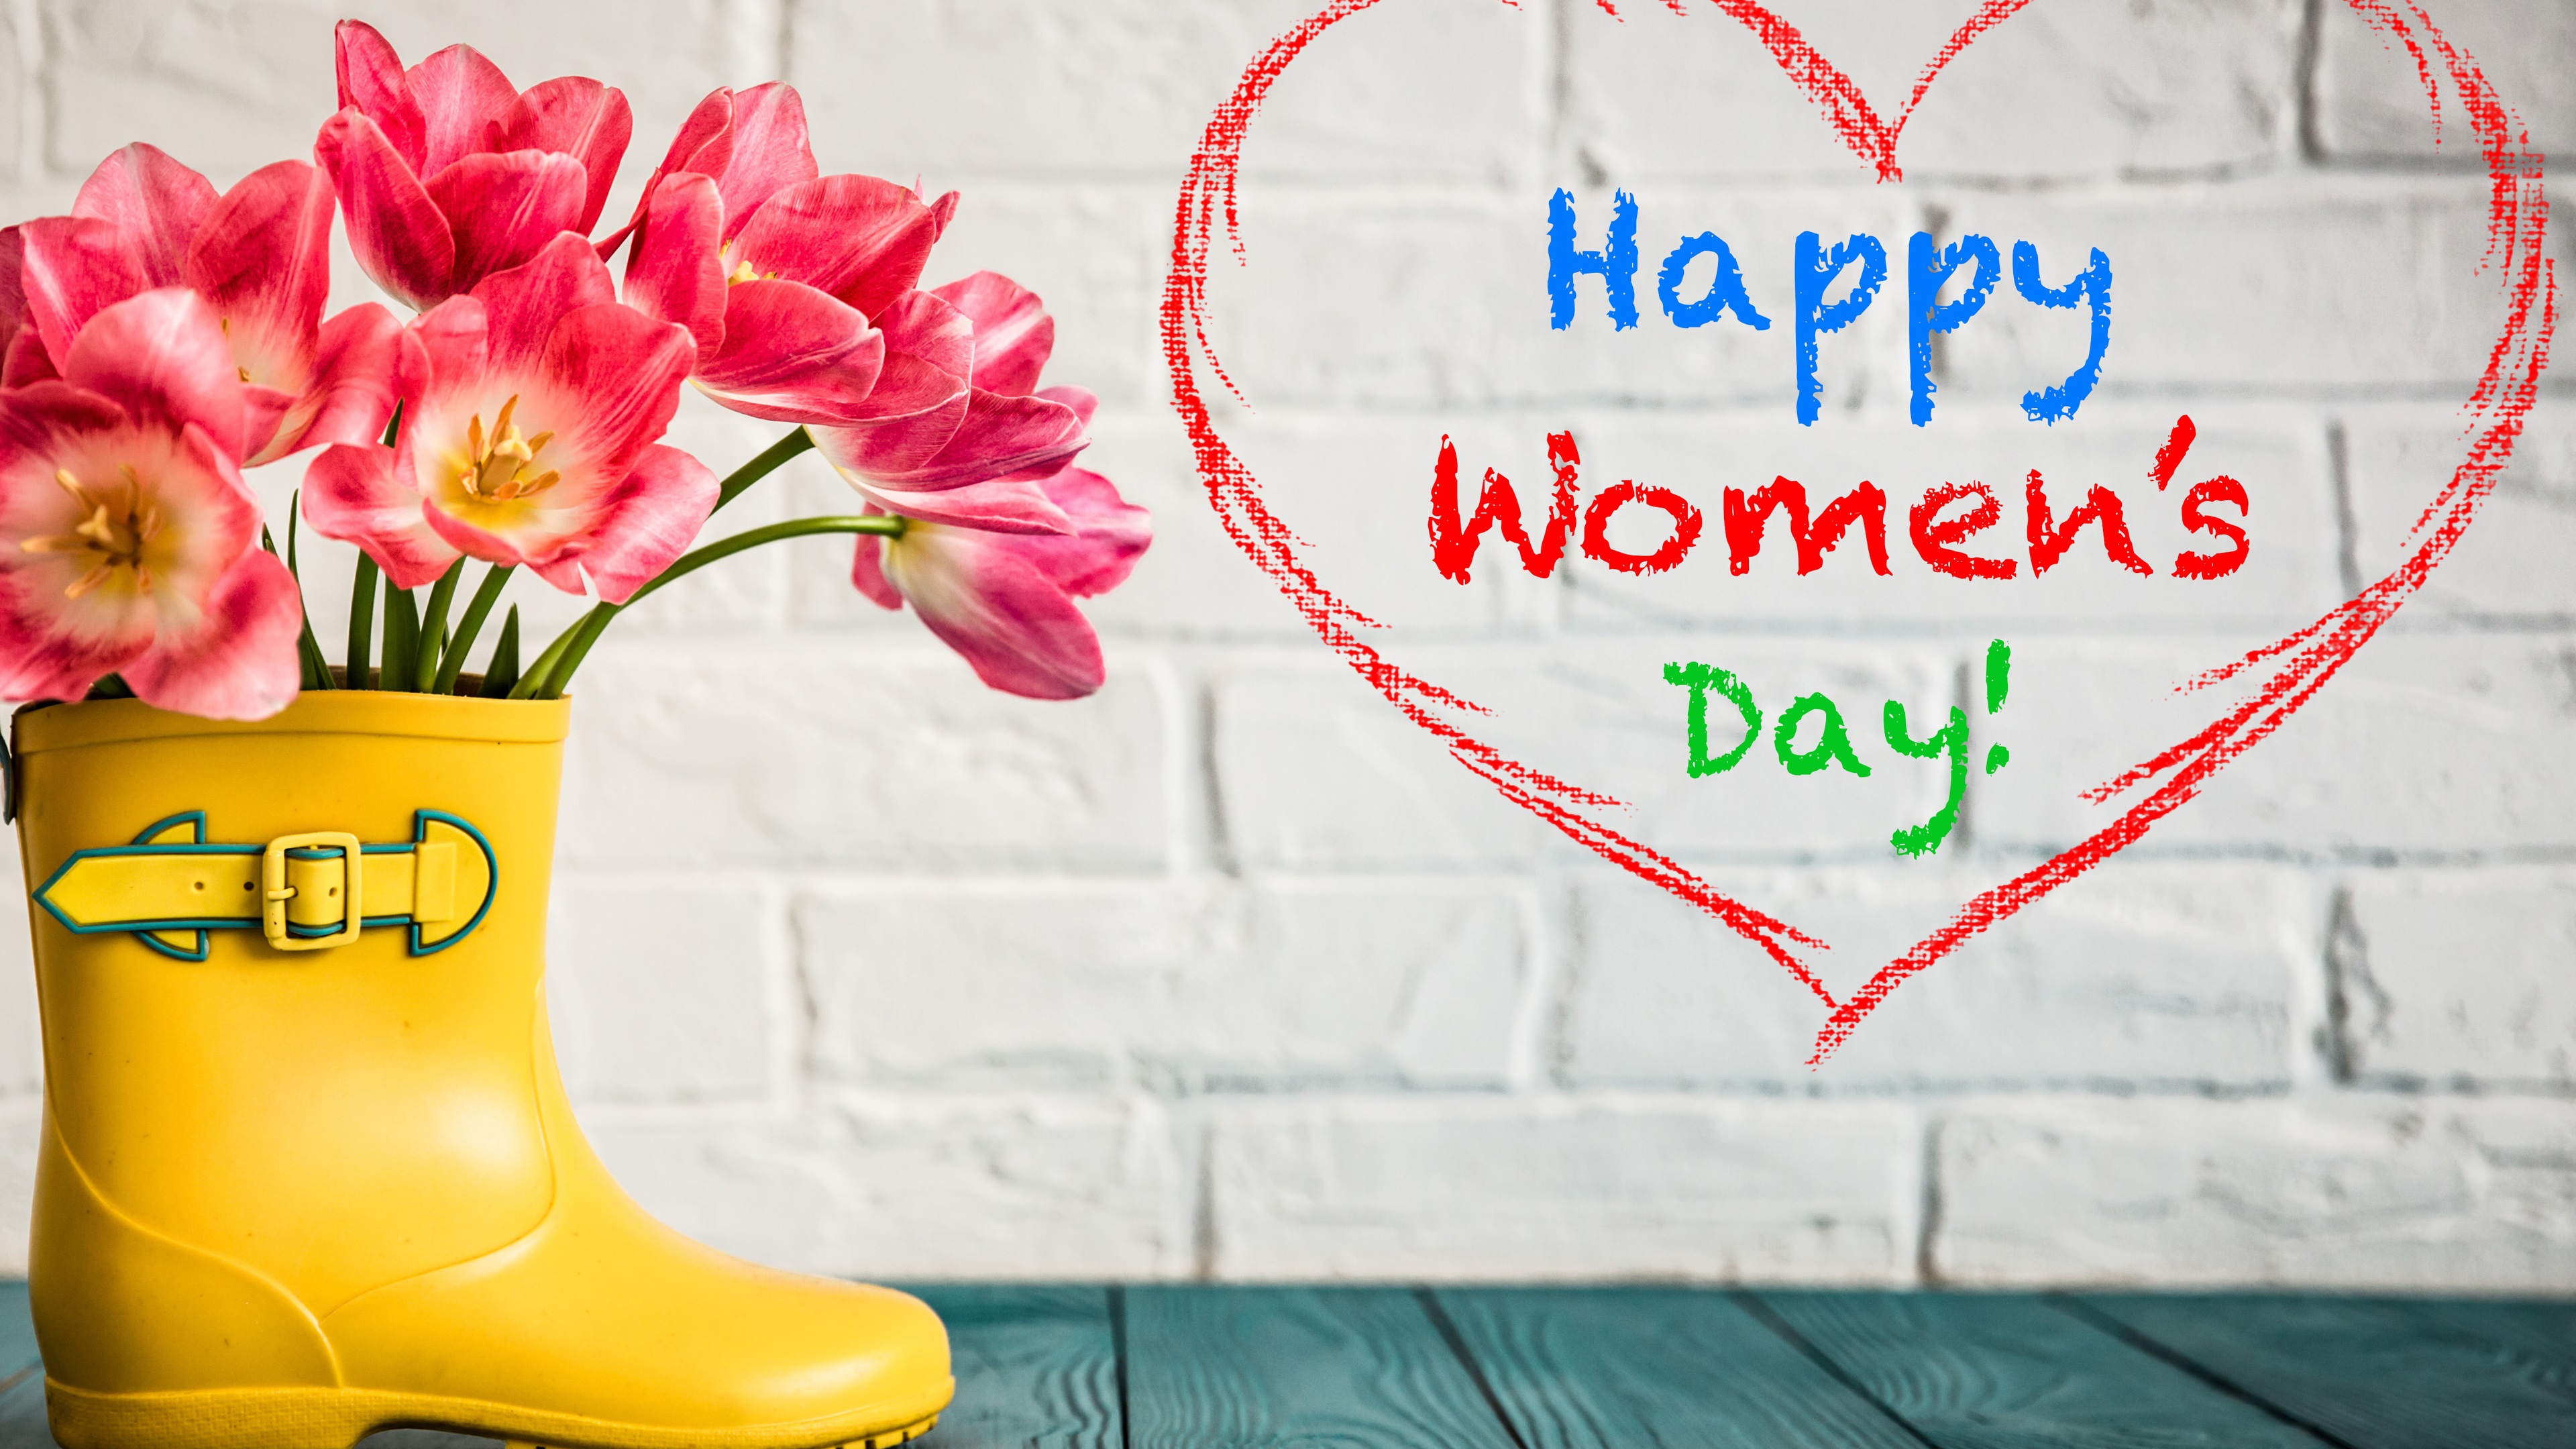 Wallpaper Happy Women S Day, Shoes, Pink Tulips - Happy Women's Day 4k - HD Wallpaper 